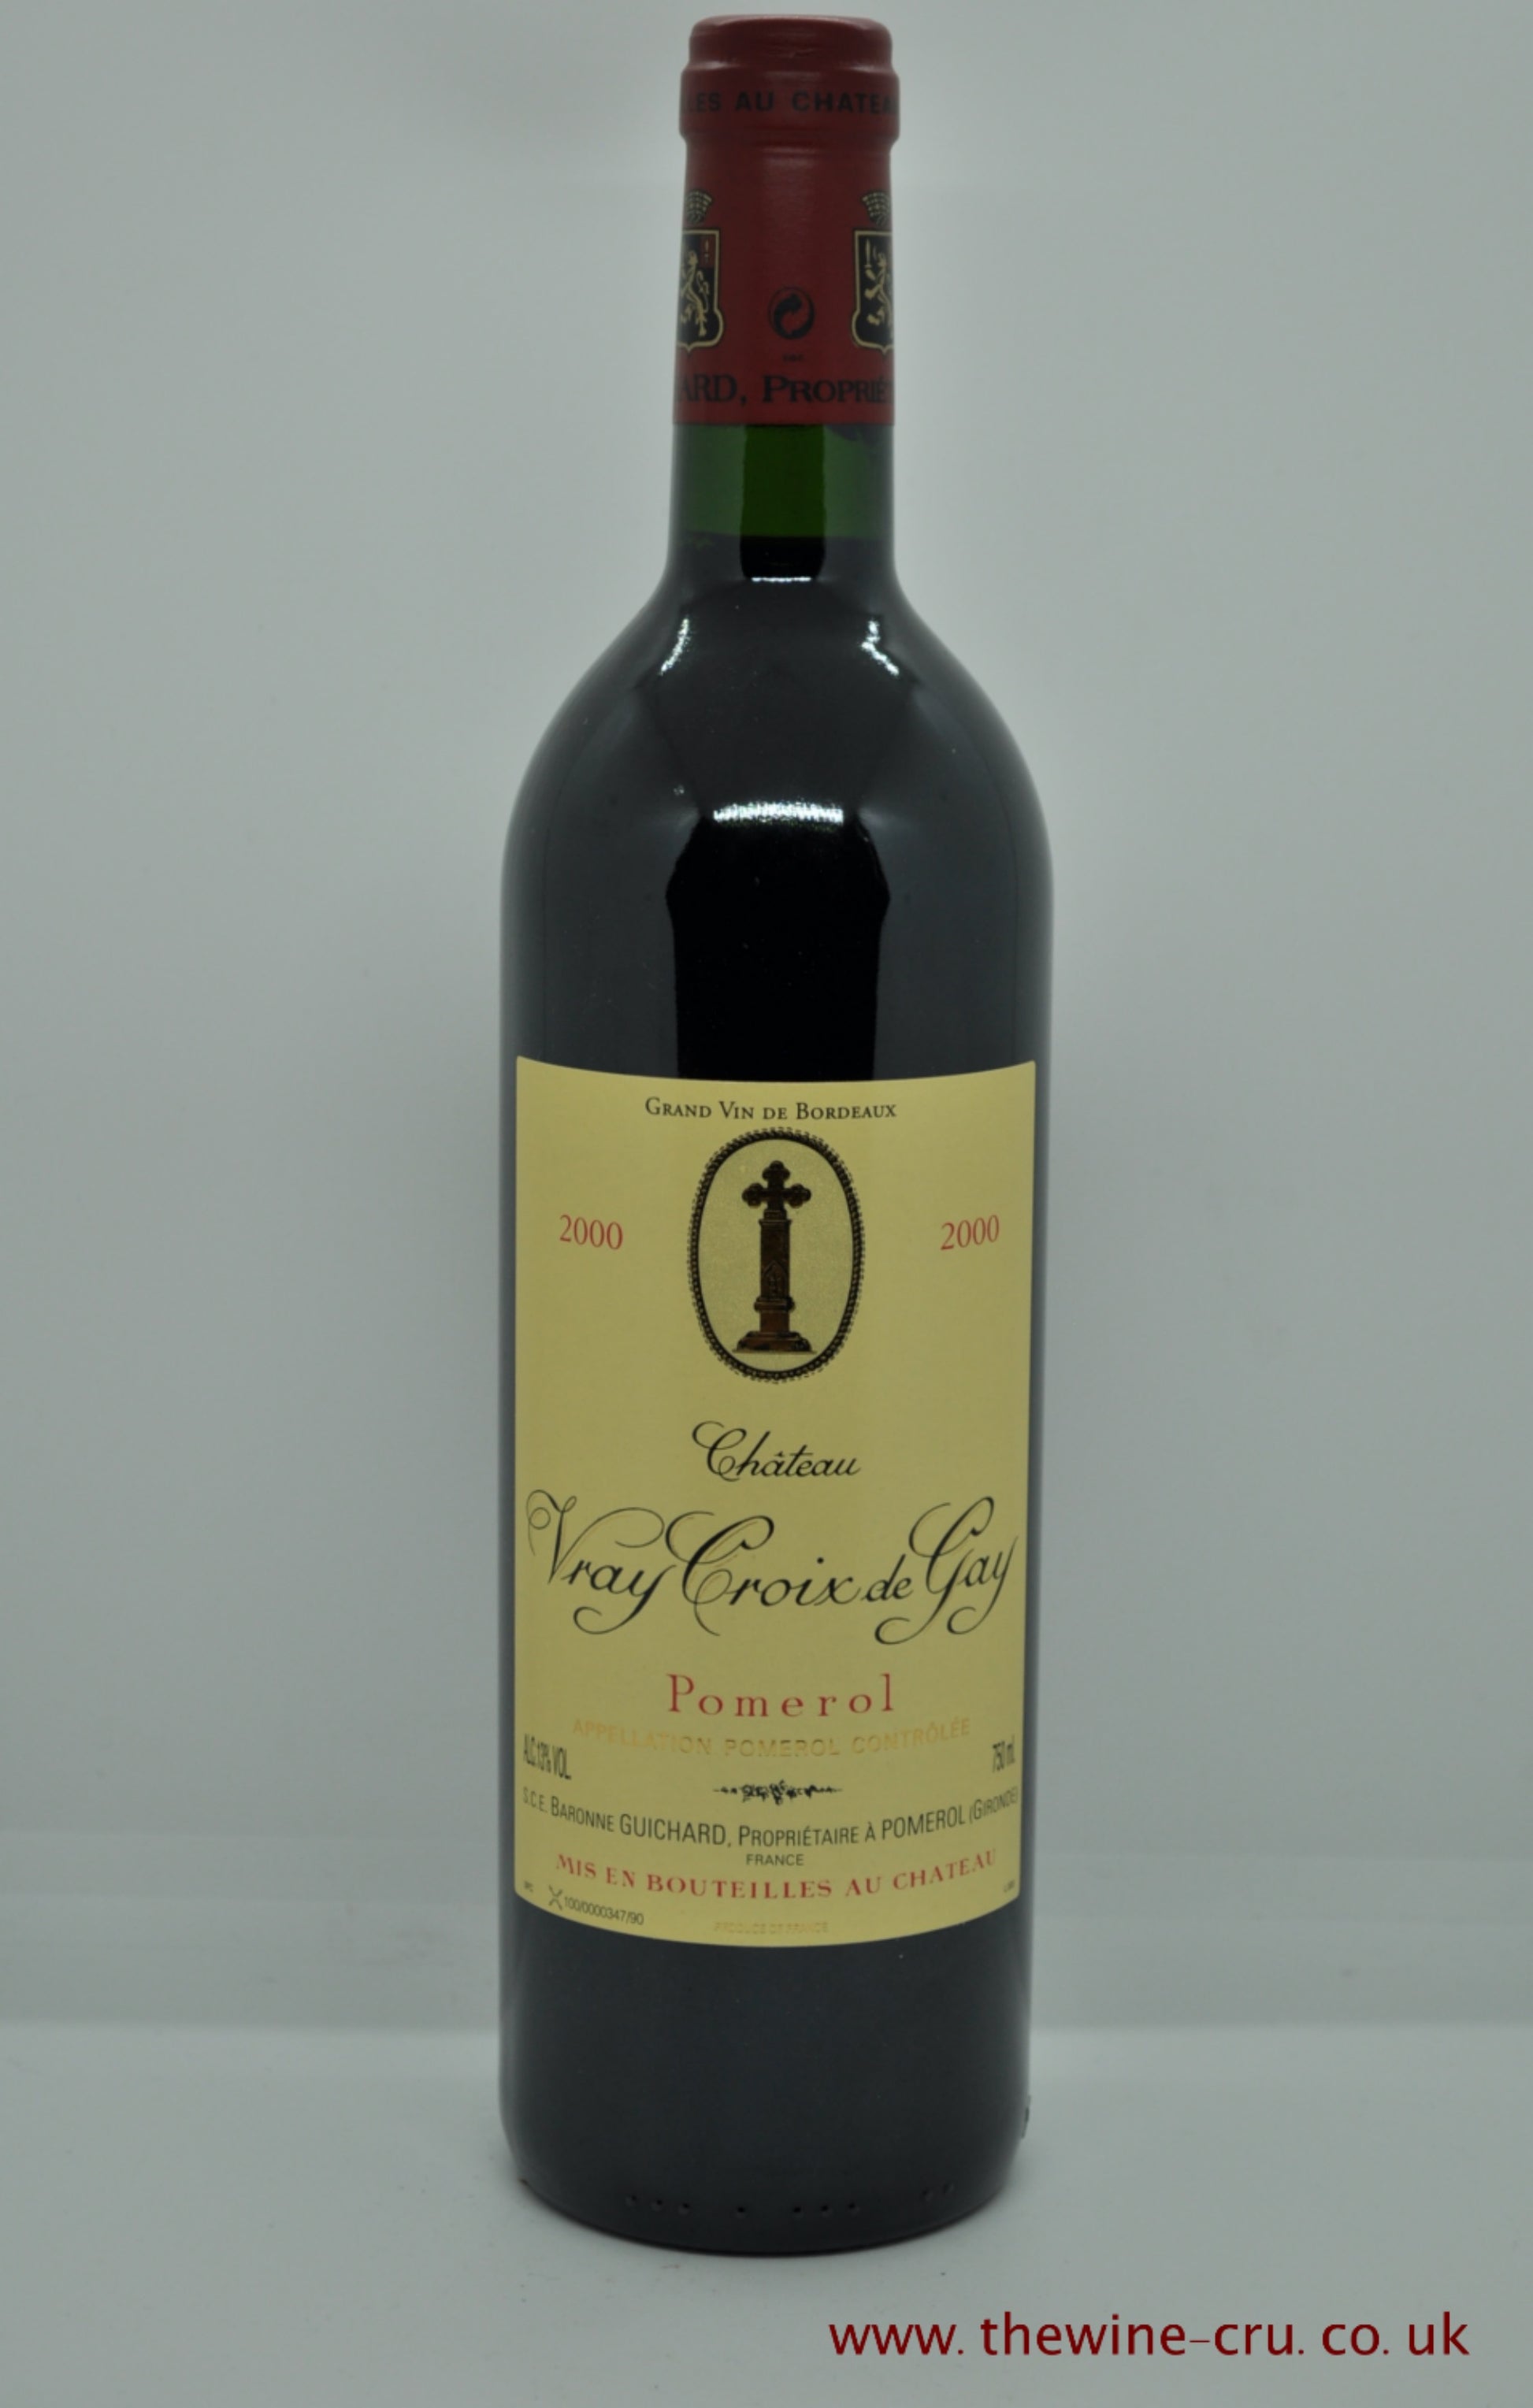 2000 vintage red wine. Chateau Vray Croix de Gay 2000. France, Bordeaux. Immediate delivery. Free local delivery. Gift wrapping available.